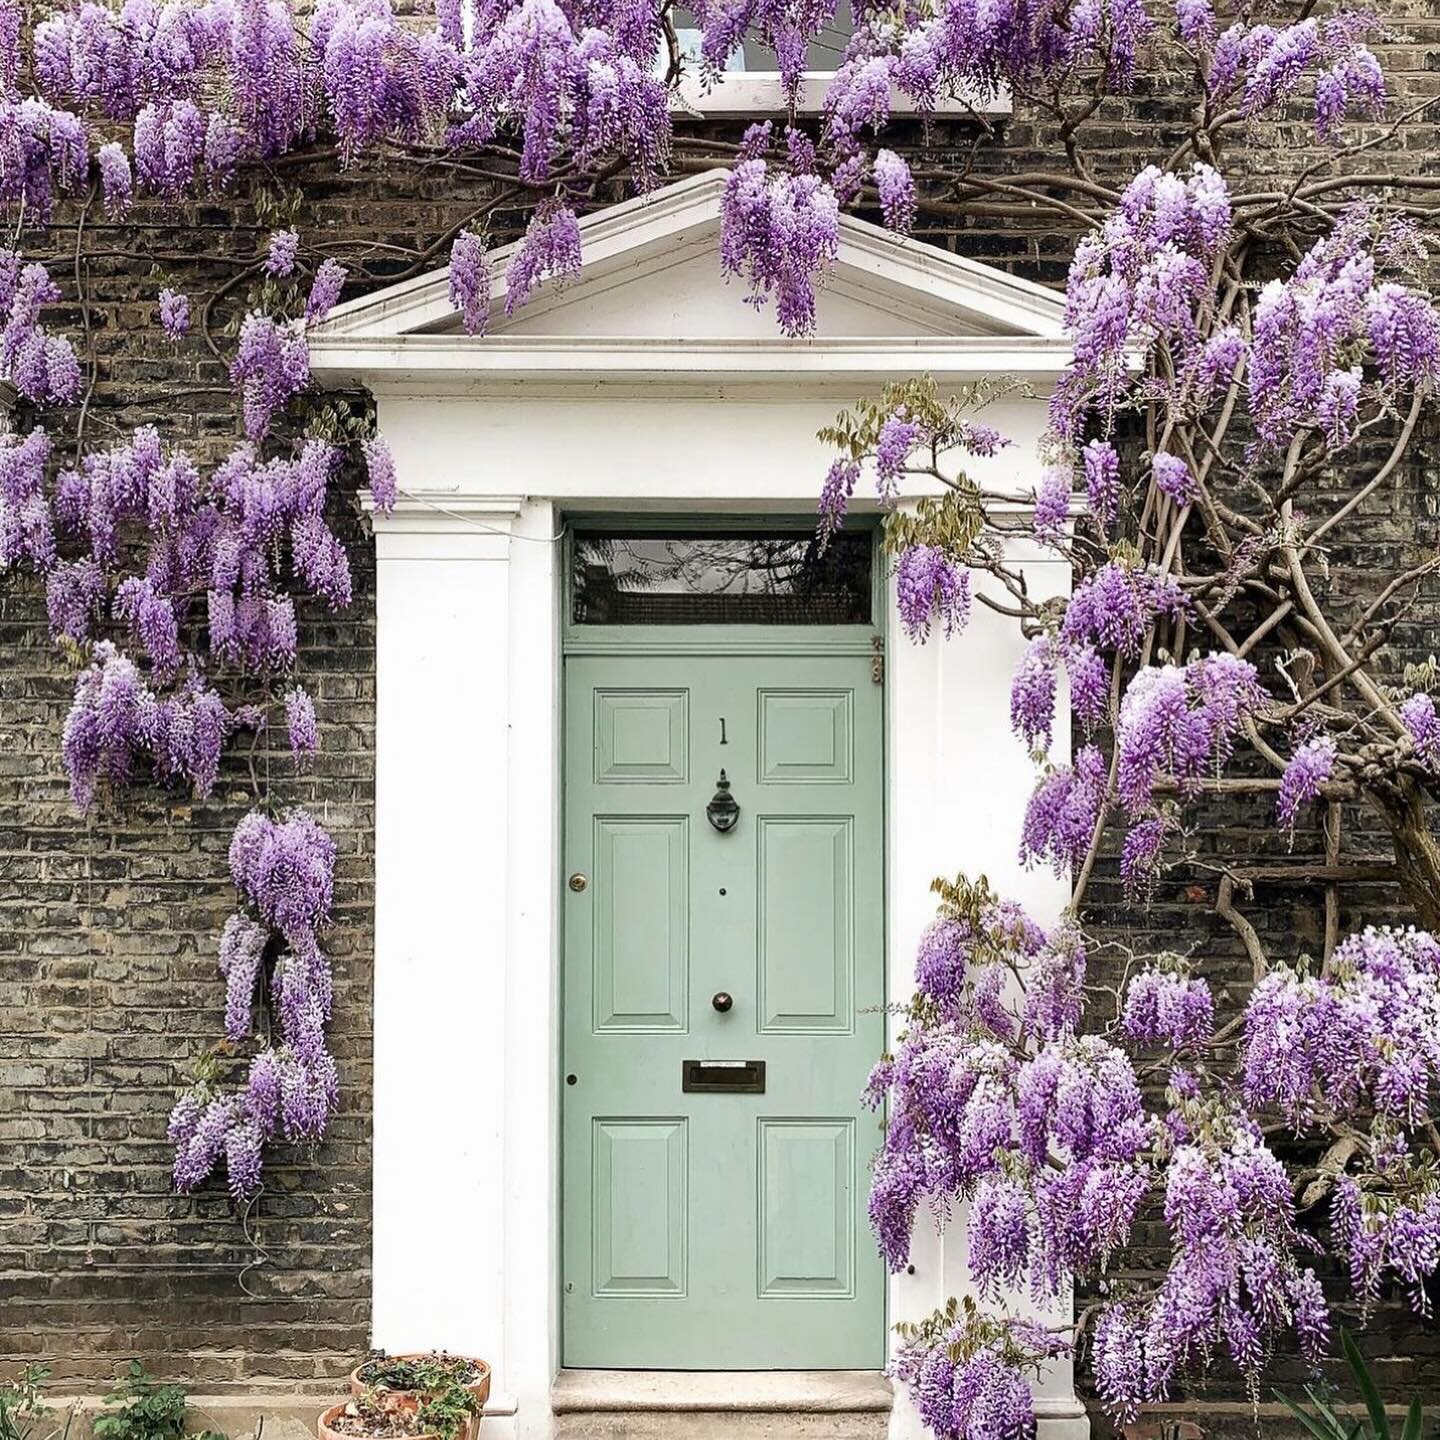 🪻🌸Front door goals when Spring is springing. I&rsquo;m crushing hard on these! Which of these do you love the most?? 🌹🌼
.
1st 📸: @jesstudd
2nd 📸: @brianpuruiz
3rd 📸: @schumacher1889
4th 📸: @hirestreetuk
5th 📸: @alejandroloar
6th 📸: @jo_rodg